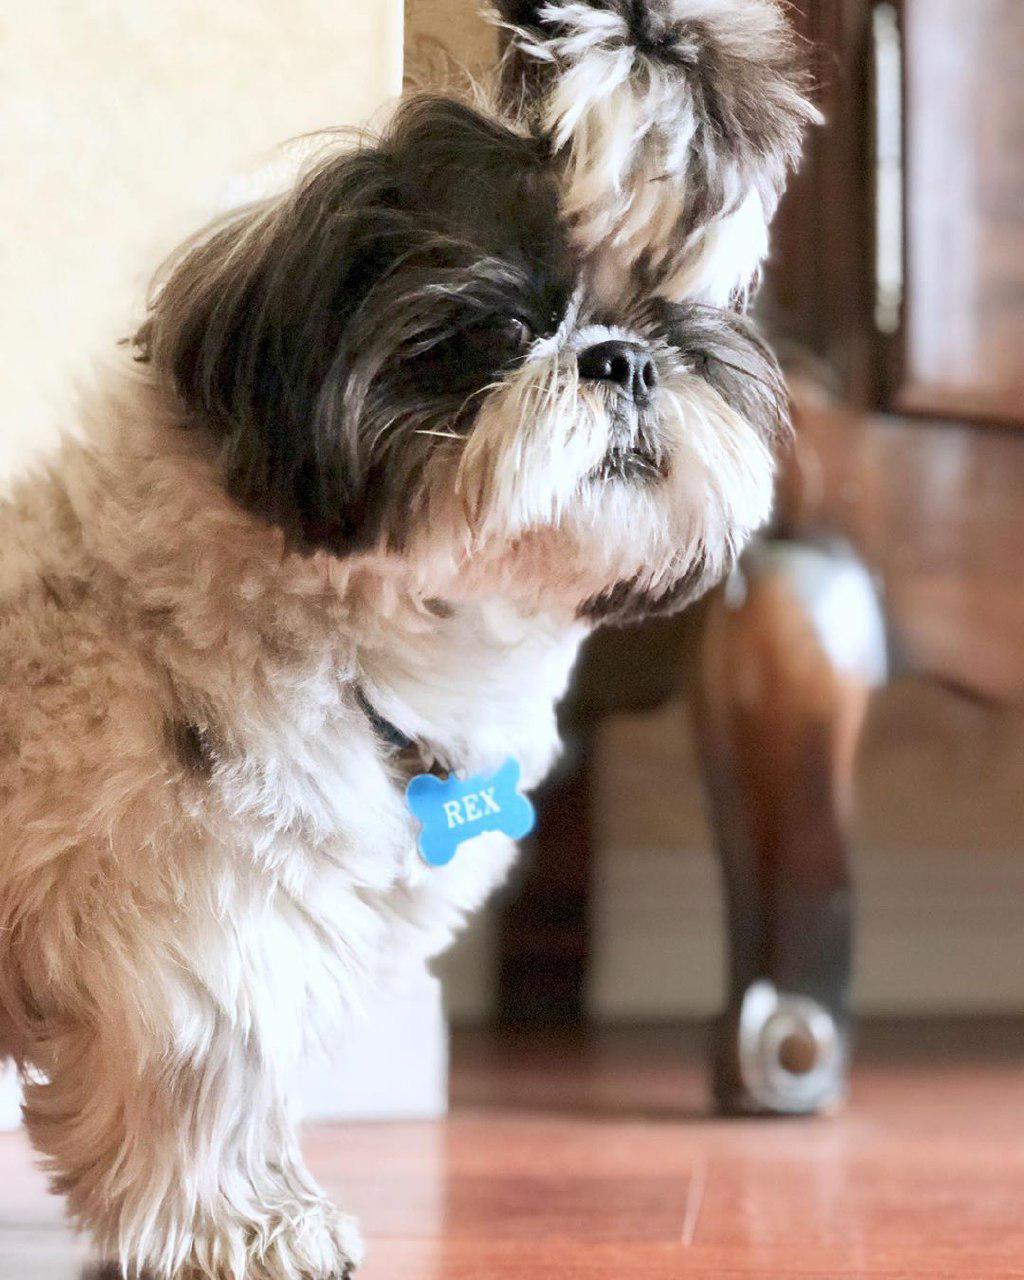 A Shih Tzu standing on the floor with its curious face